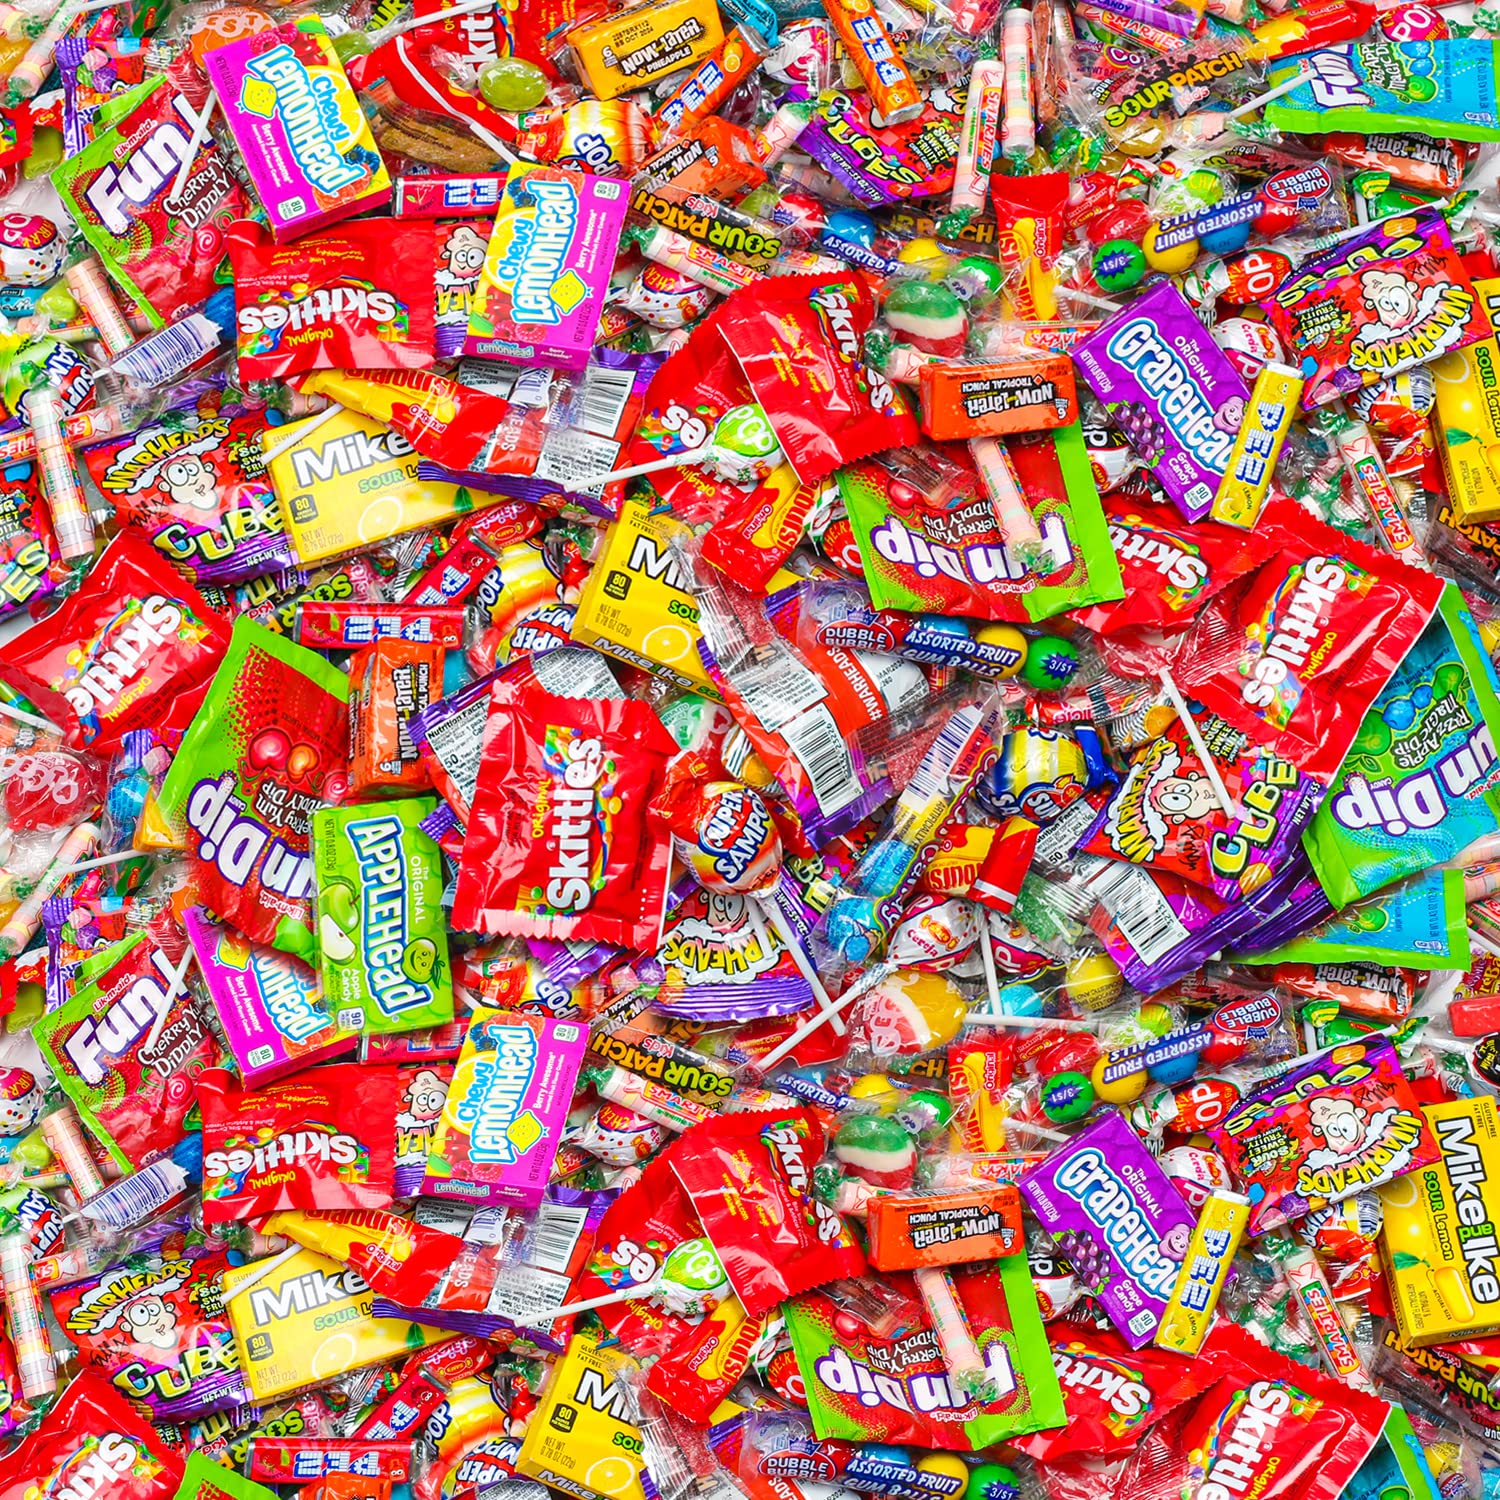 Candy Assortment - Pinata Candy Mix - 5 LB - Individually Wrapped Candy Bulk - Goodie Bag Filler Candies - Giant Mix - Candy For Parade, Office, Birthdays, Fiesta, Carnival, and More